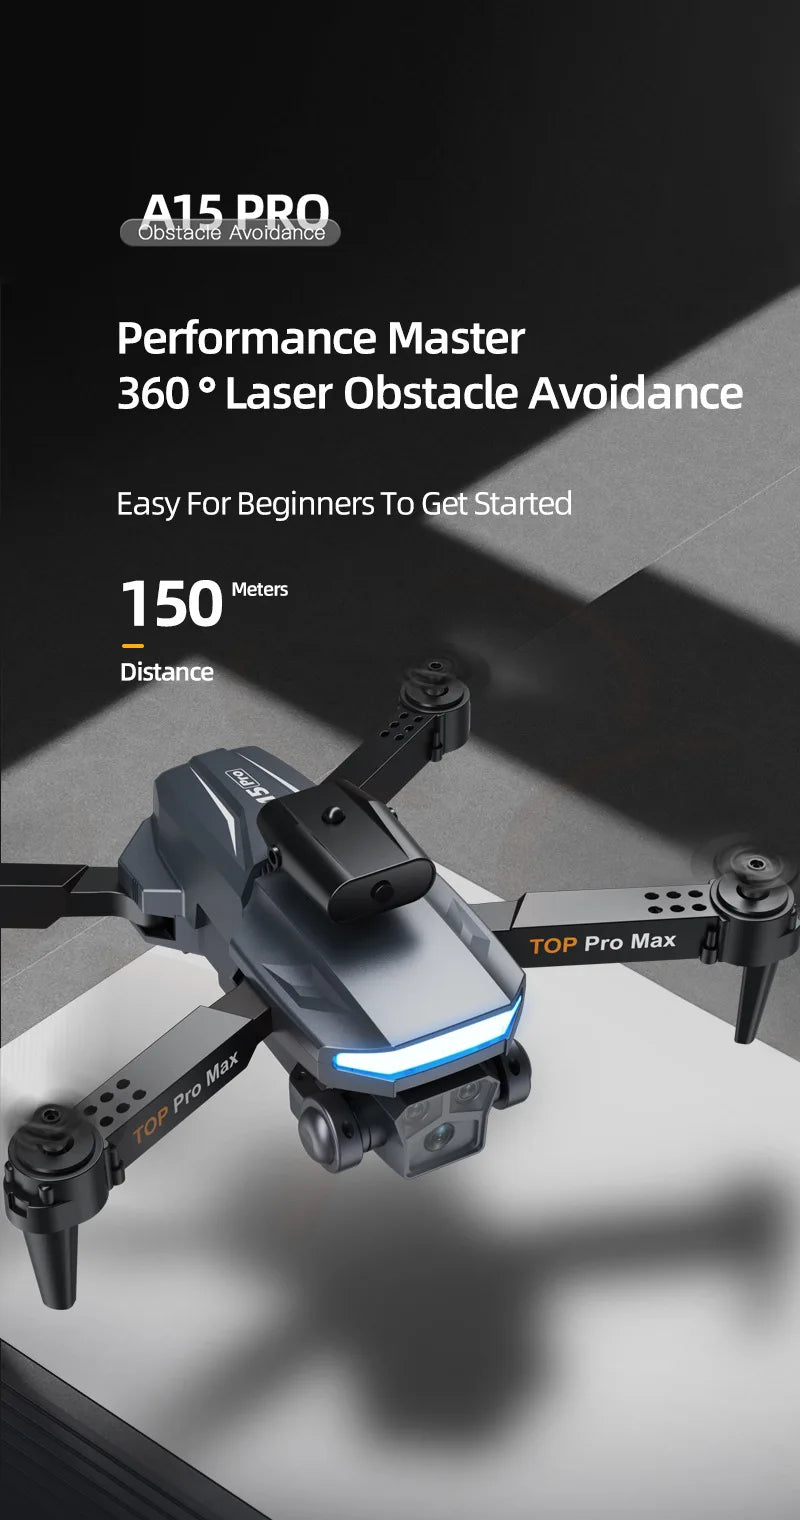 A15 Drone, 415 prq performance master 360 0 laser obstacle avoidance easy